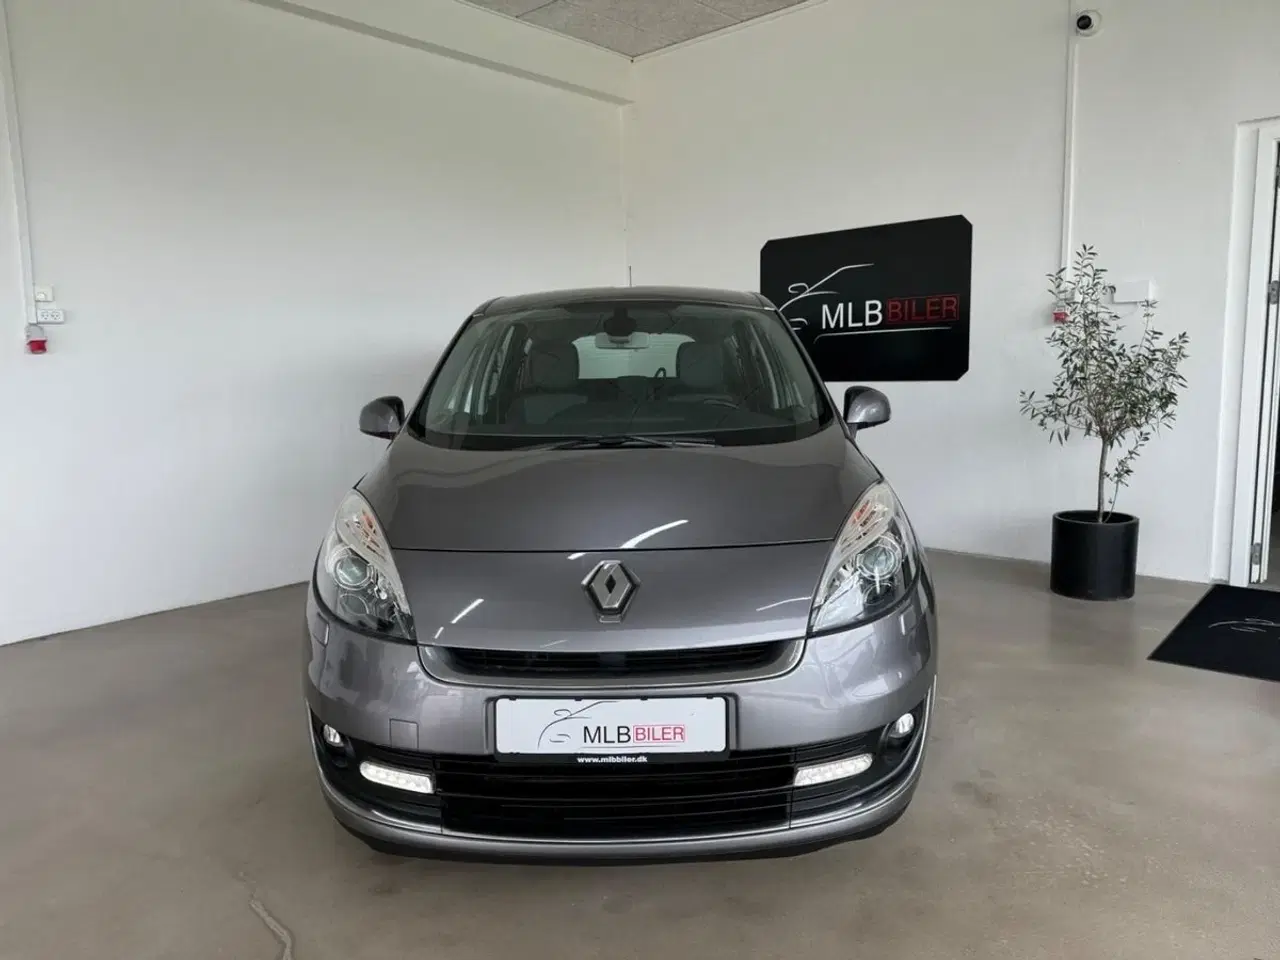 Billede 3 - Renault Grand Scenic III 1,6 dCi 130 Expression 7prs